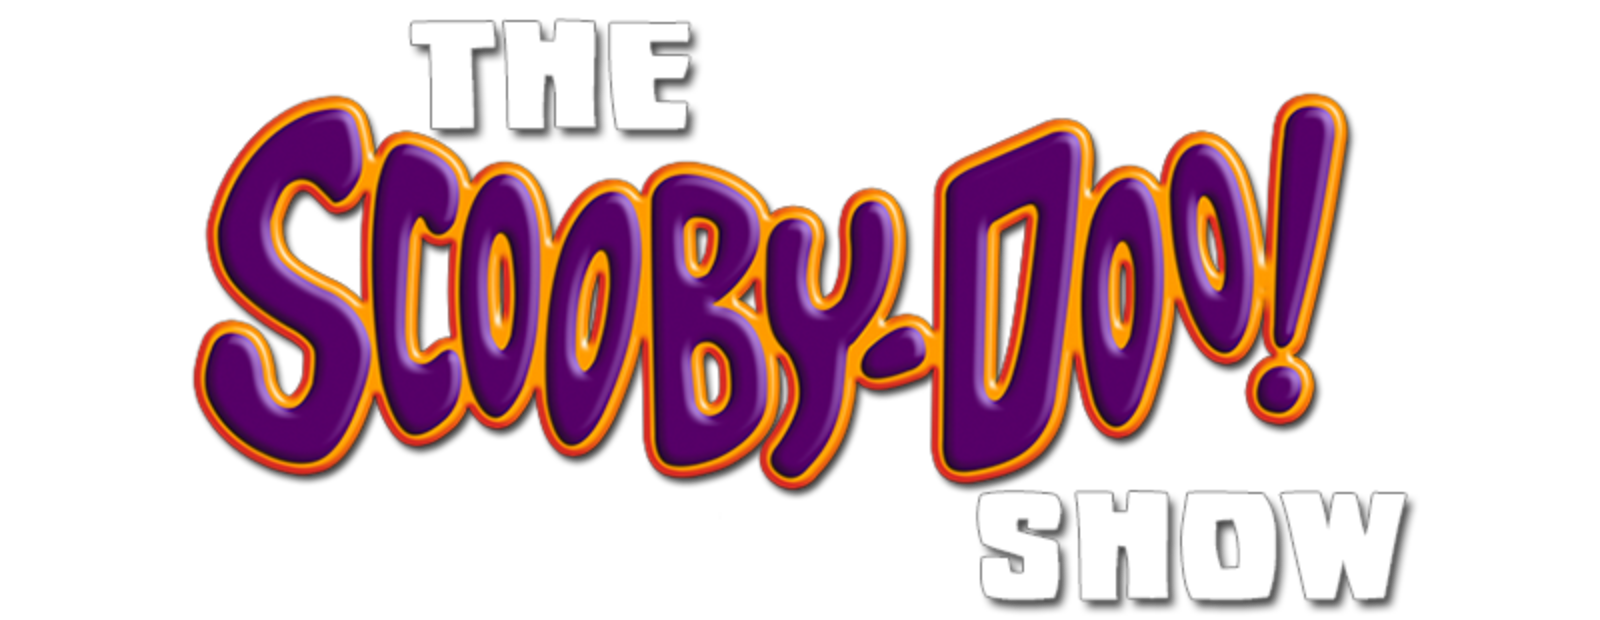 The Scooby-Doo Show Complete (4 DVDs Box Set)